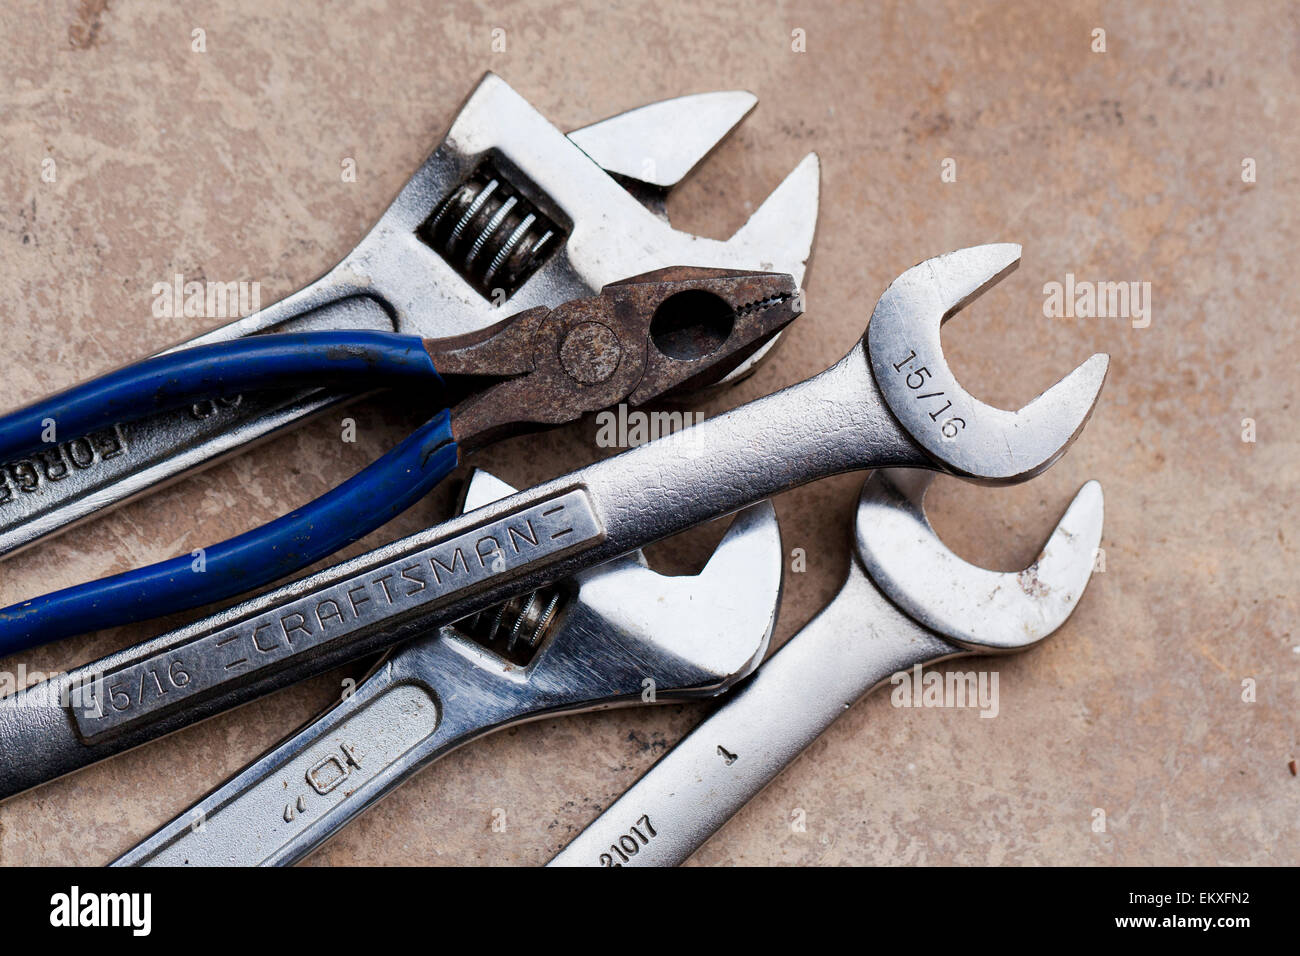 Auto repair wrenches and pliers - USA Stock Photo